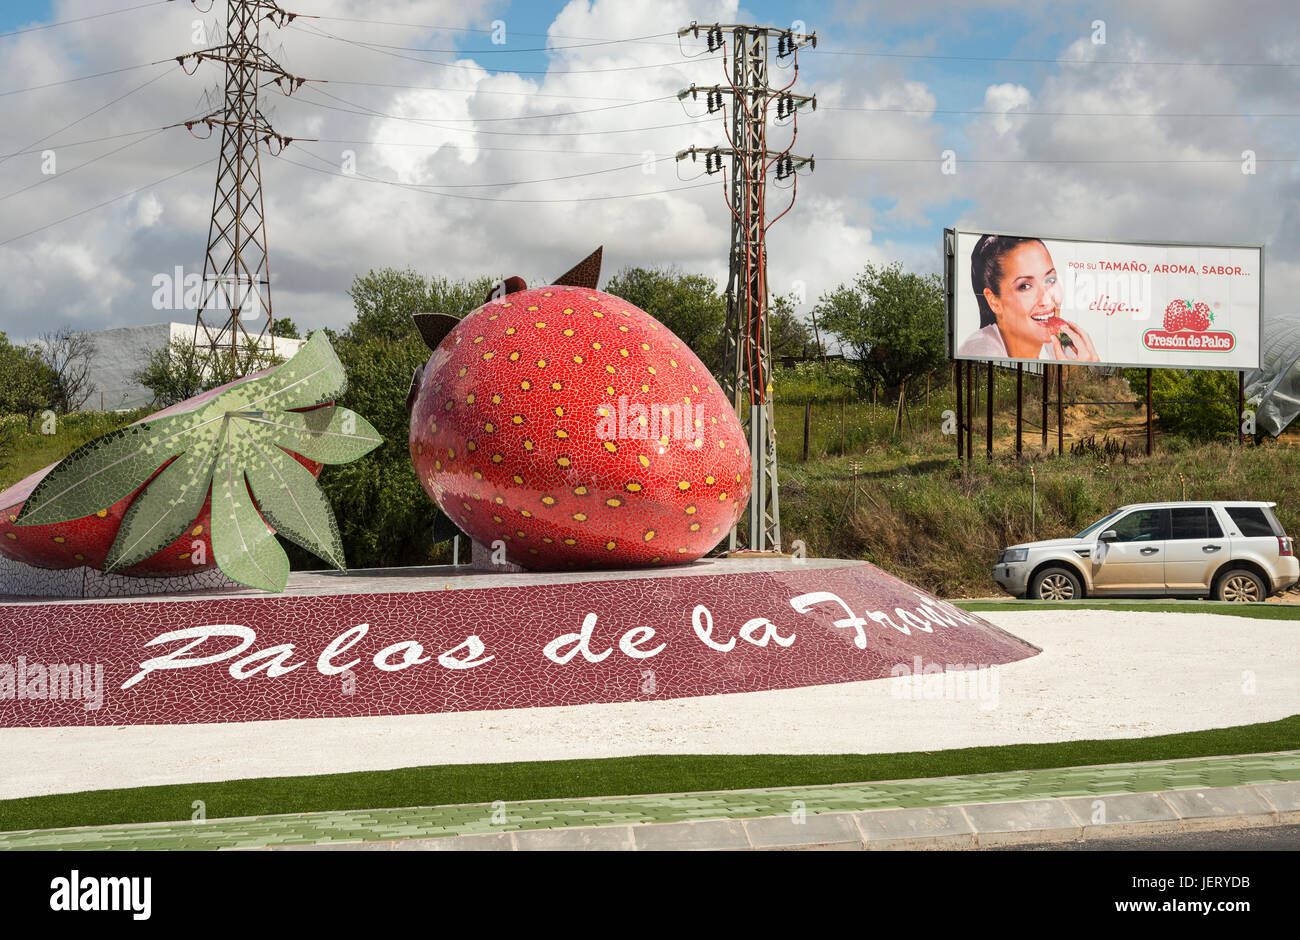 A roundabout with giant strawberry sculpture in Palos de la Frontera,  A main centre for strawberry production in Huelva province, Andalucia, Spain Stock Photo